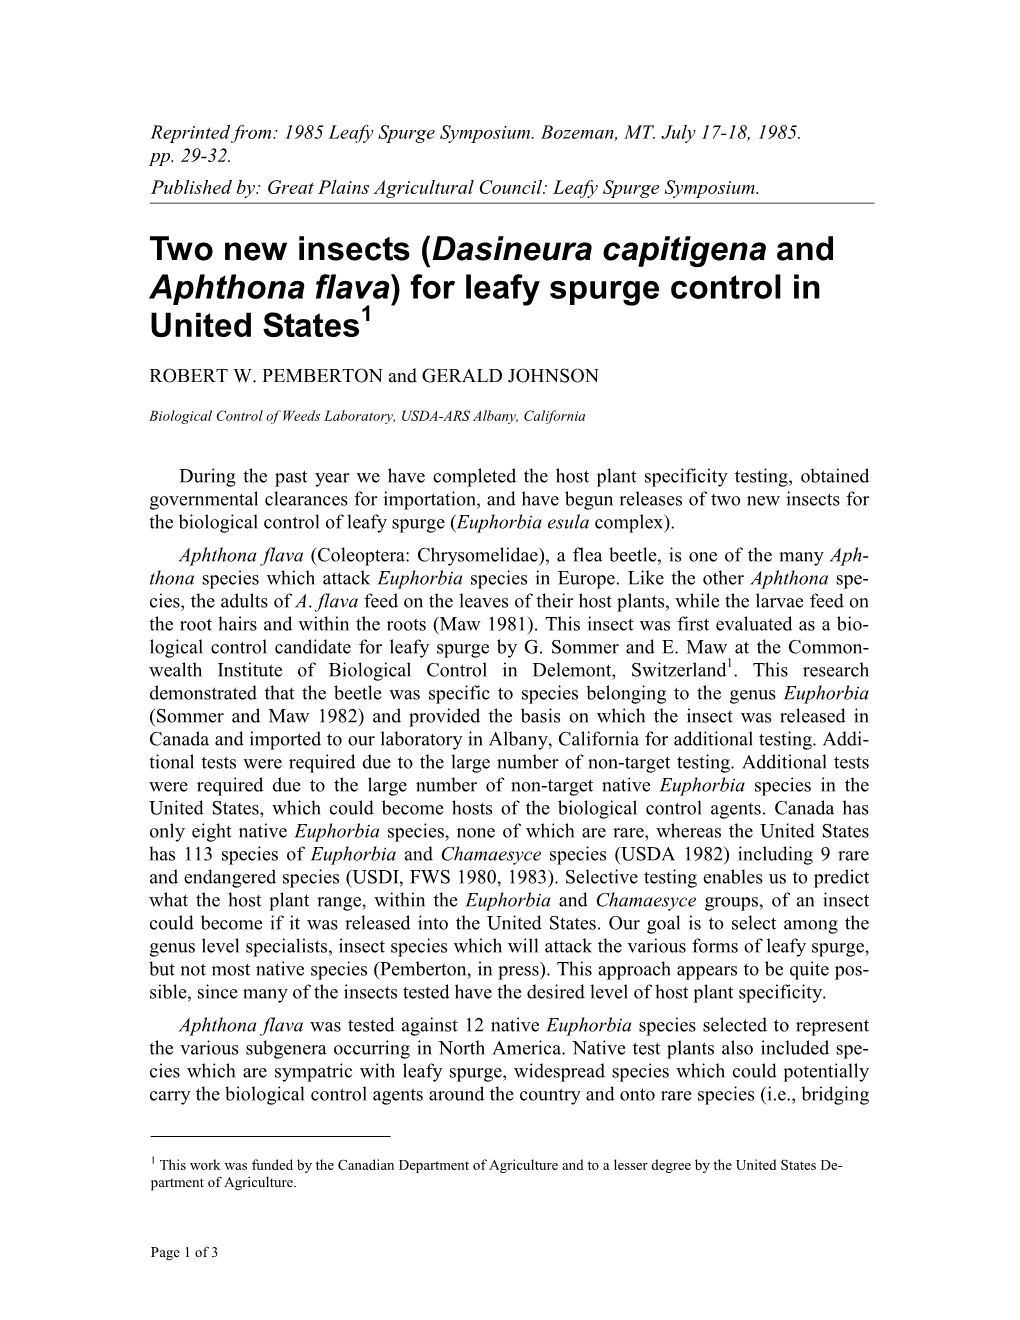 Two New Insects (Dasineura Capitigena and Aphthona Flava) for Leafy Spurge Control in United States1